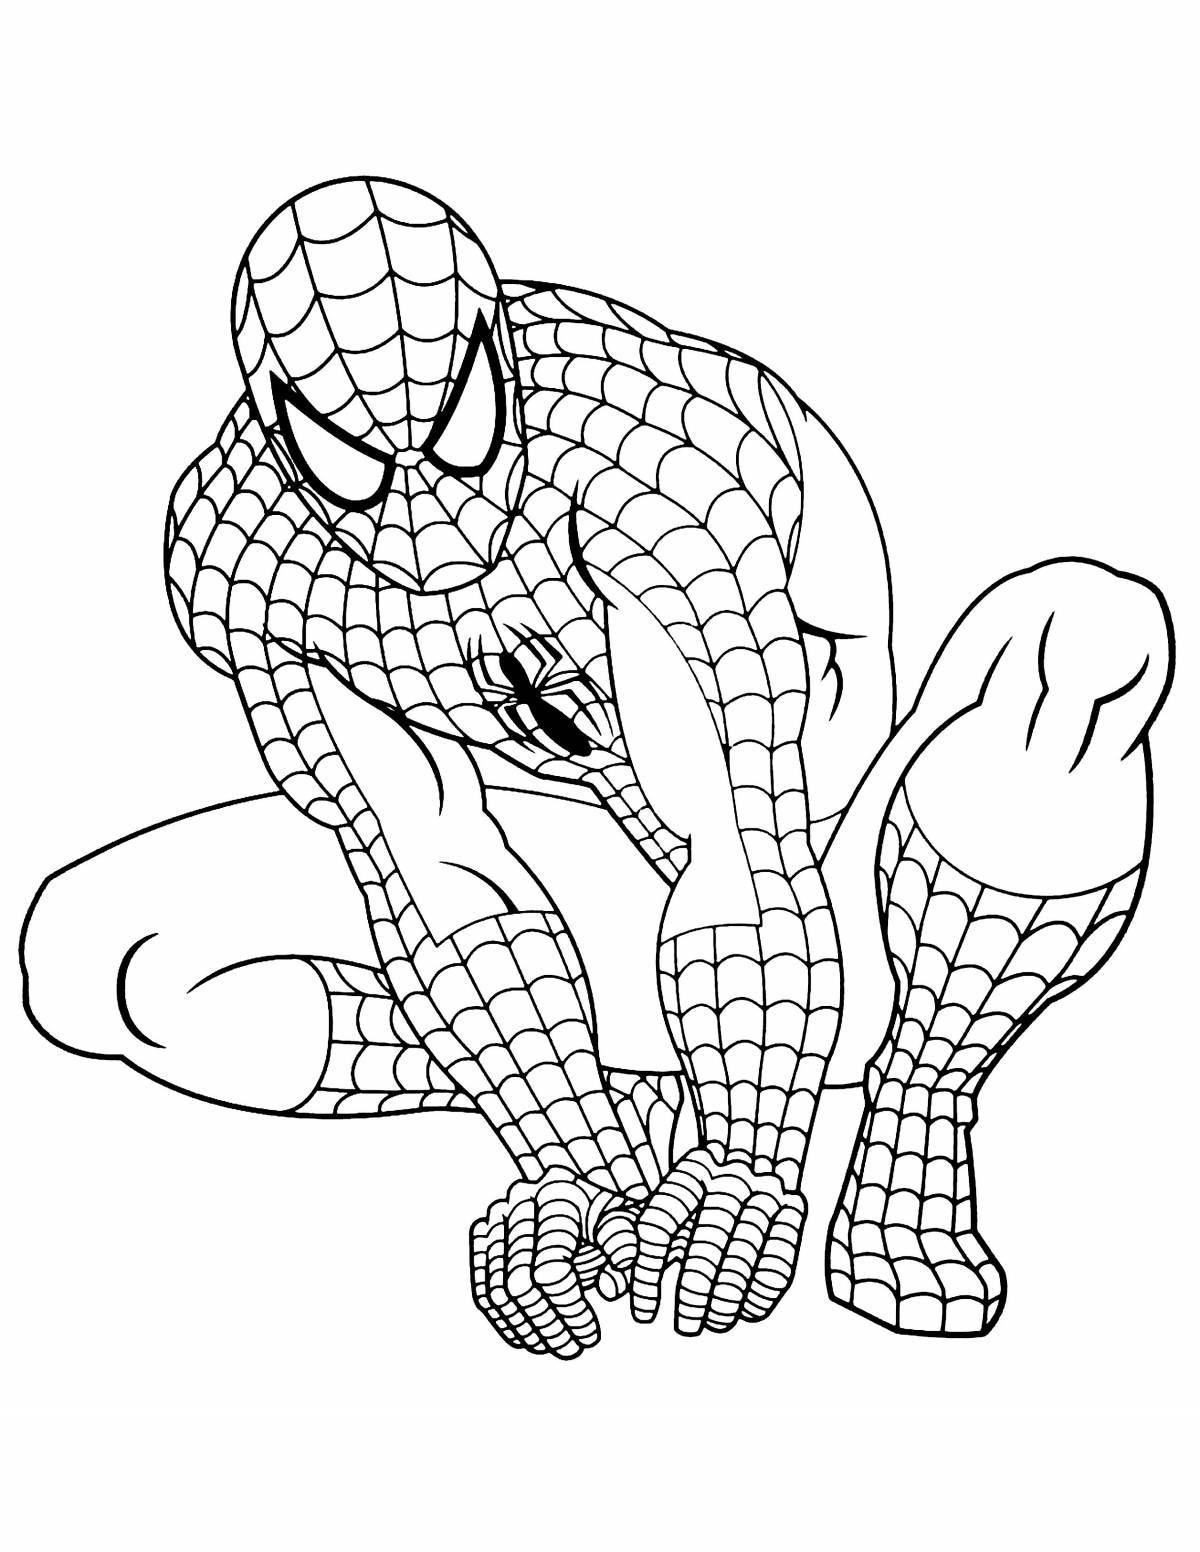 Vibrant Spiderman Coloring Page for Kids